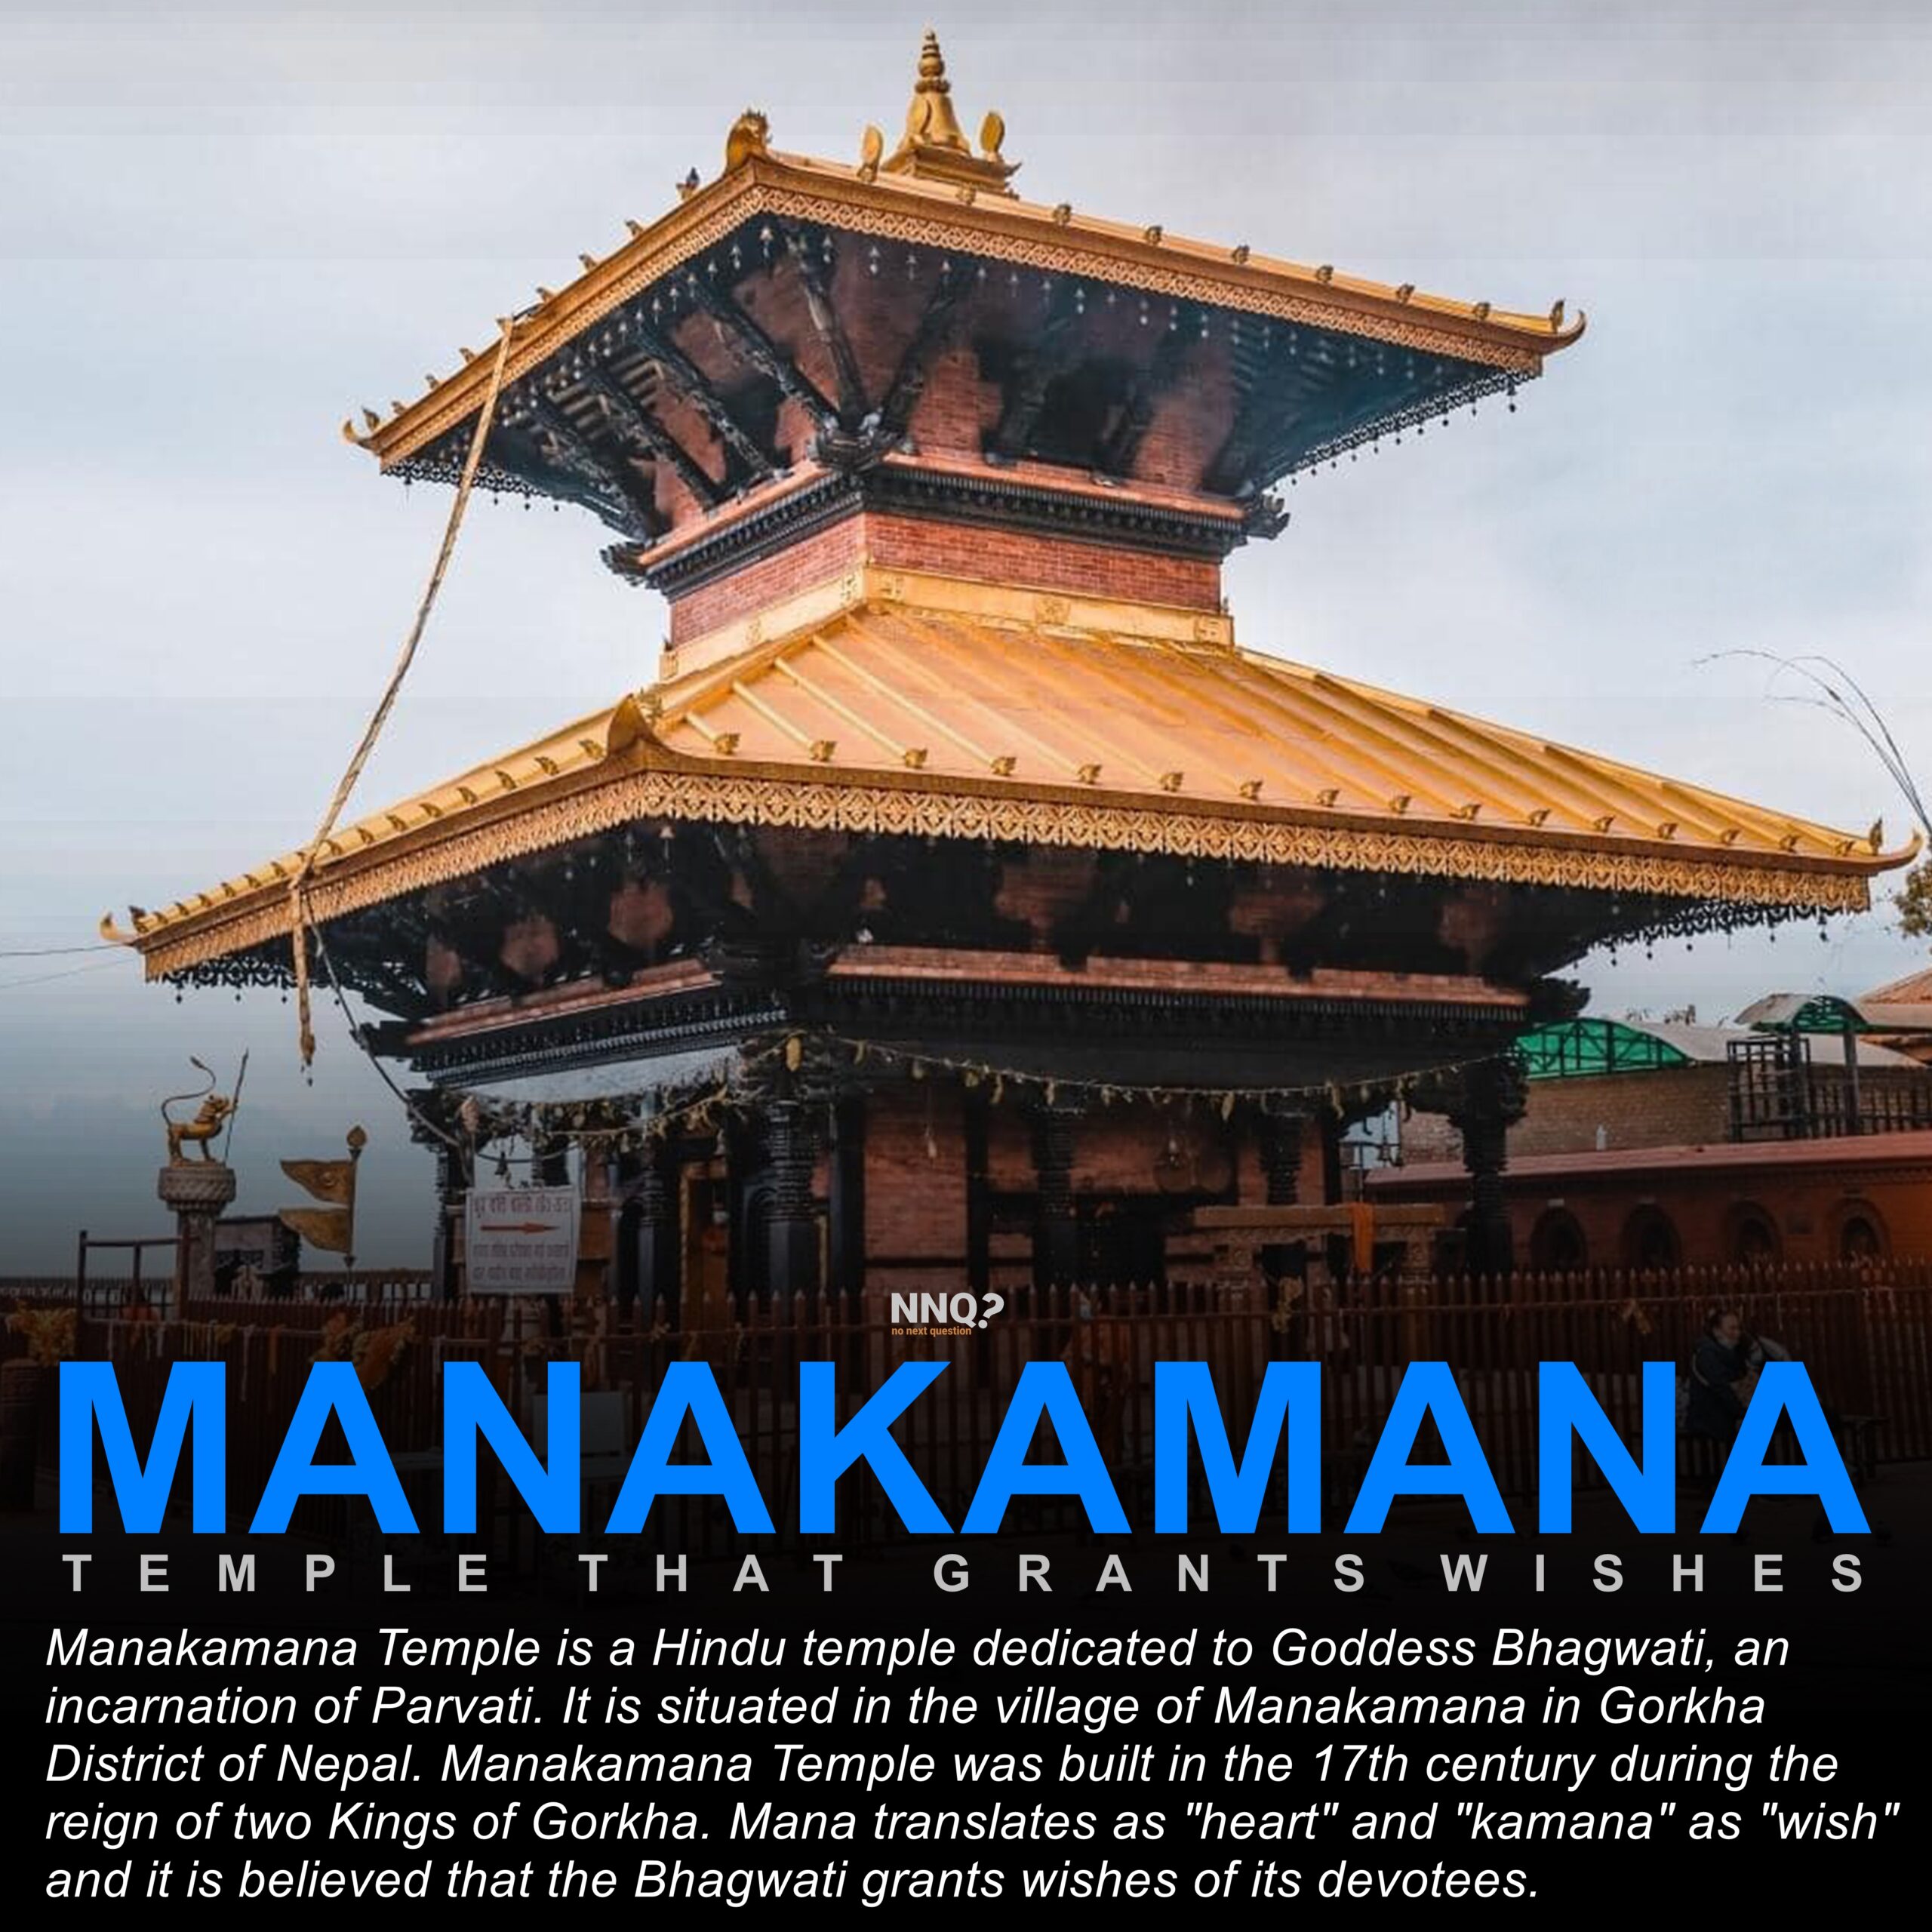 Manakamana Temple – Temple That Grants Wishes